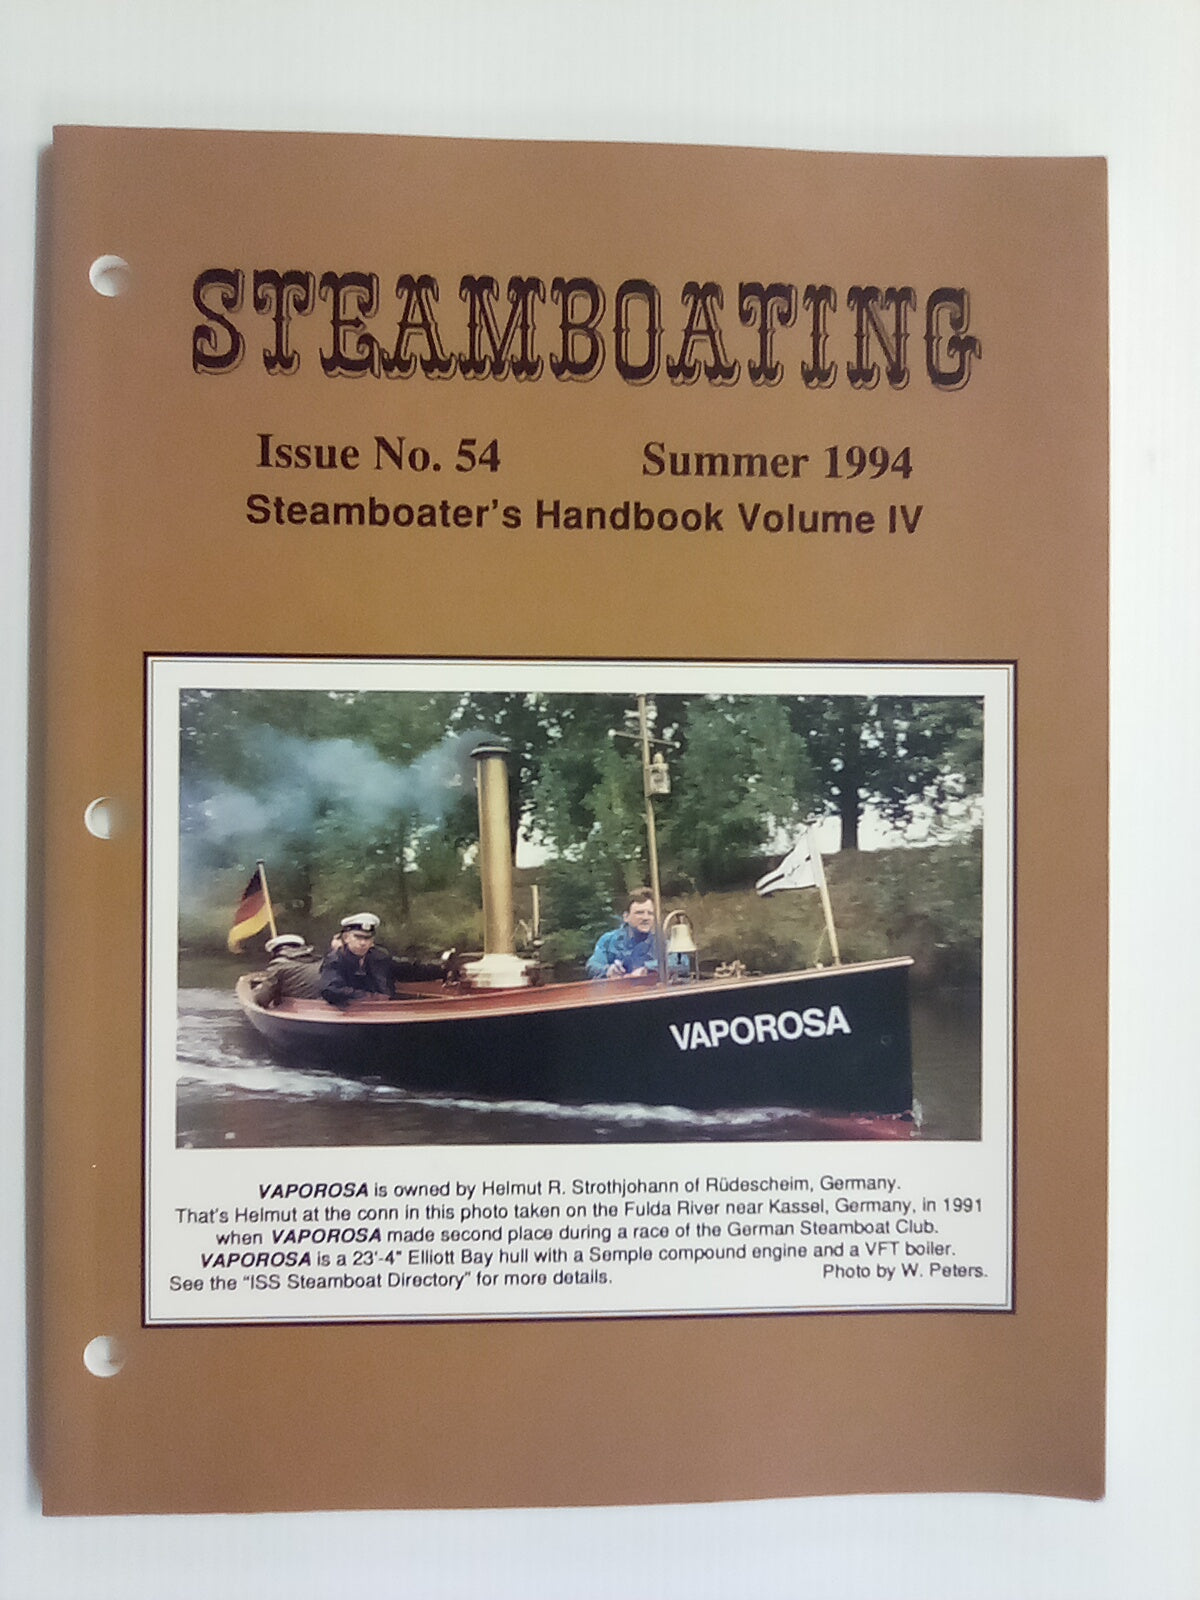 Steamboating Issue 54 Summer 1994 - Steamboaters Handbook Vol IV